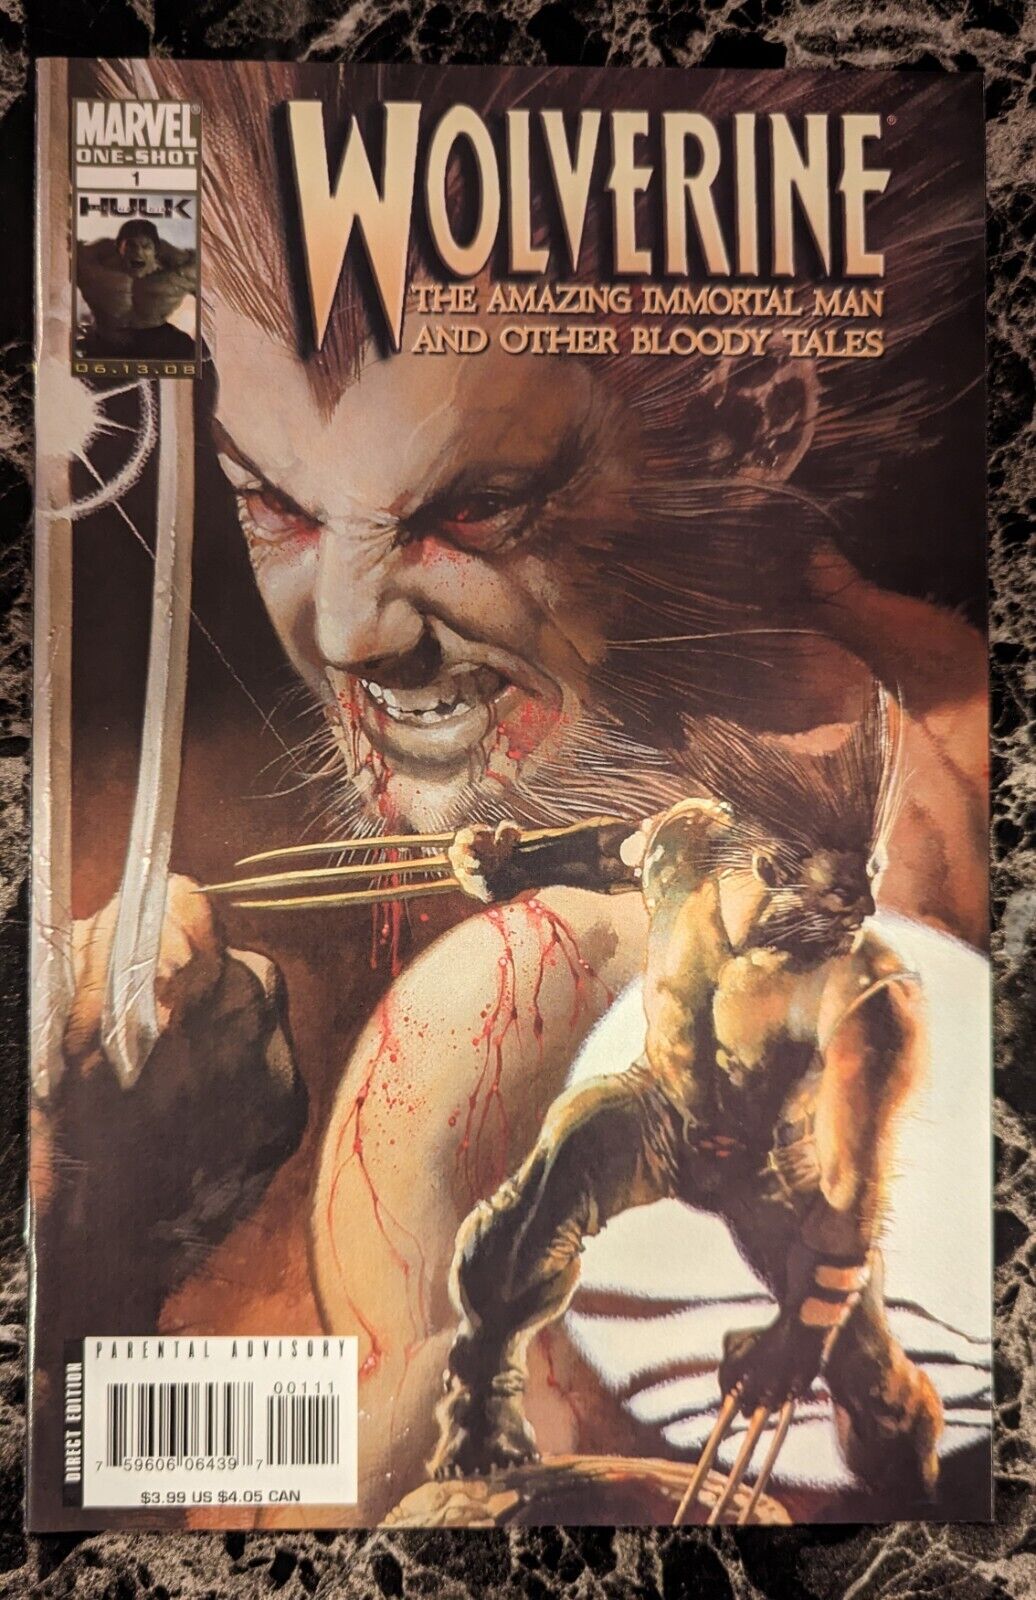 Wolverine: the Amazing Immortal Man & Other Bloody Tales (Marvel Comics 2018)